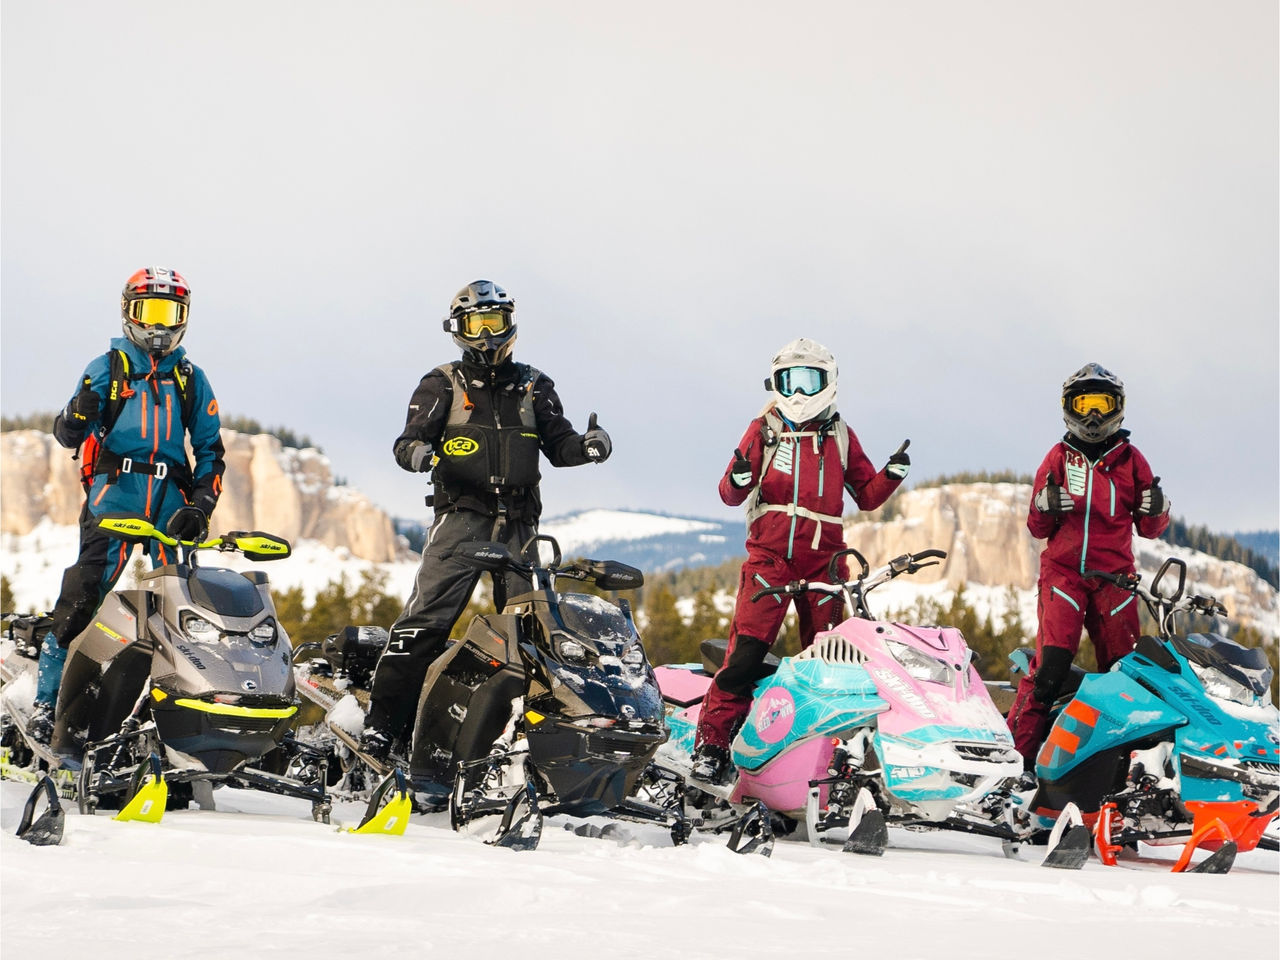 Bring your own Ski-Doo to the deep snow of Sheridan, WY